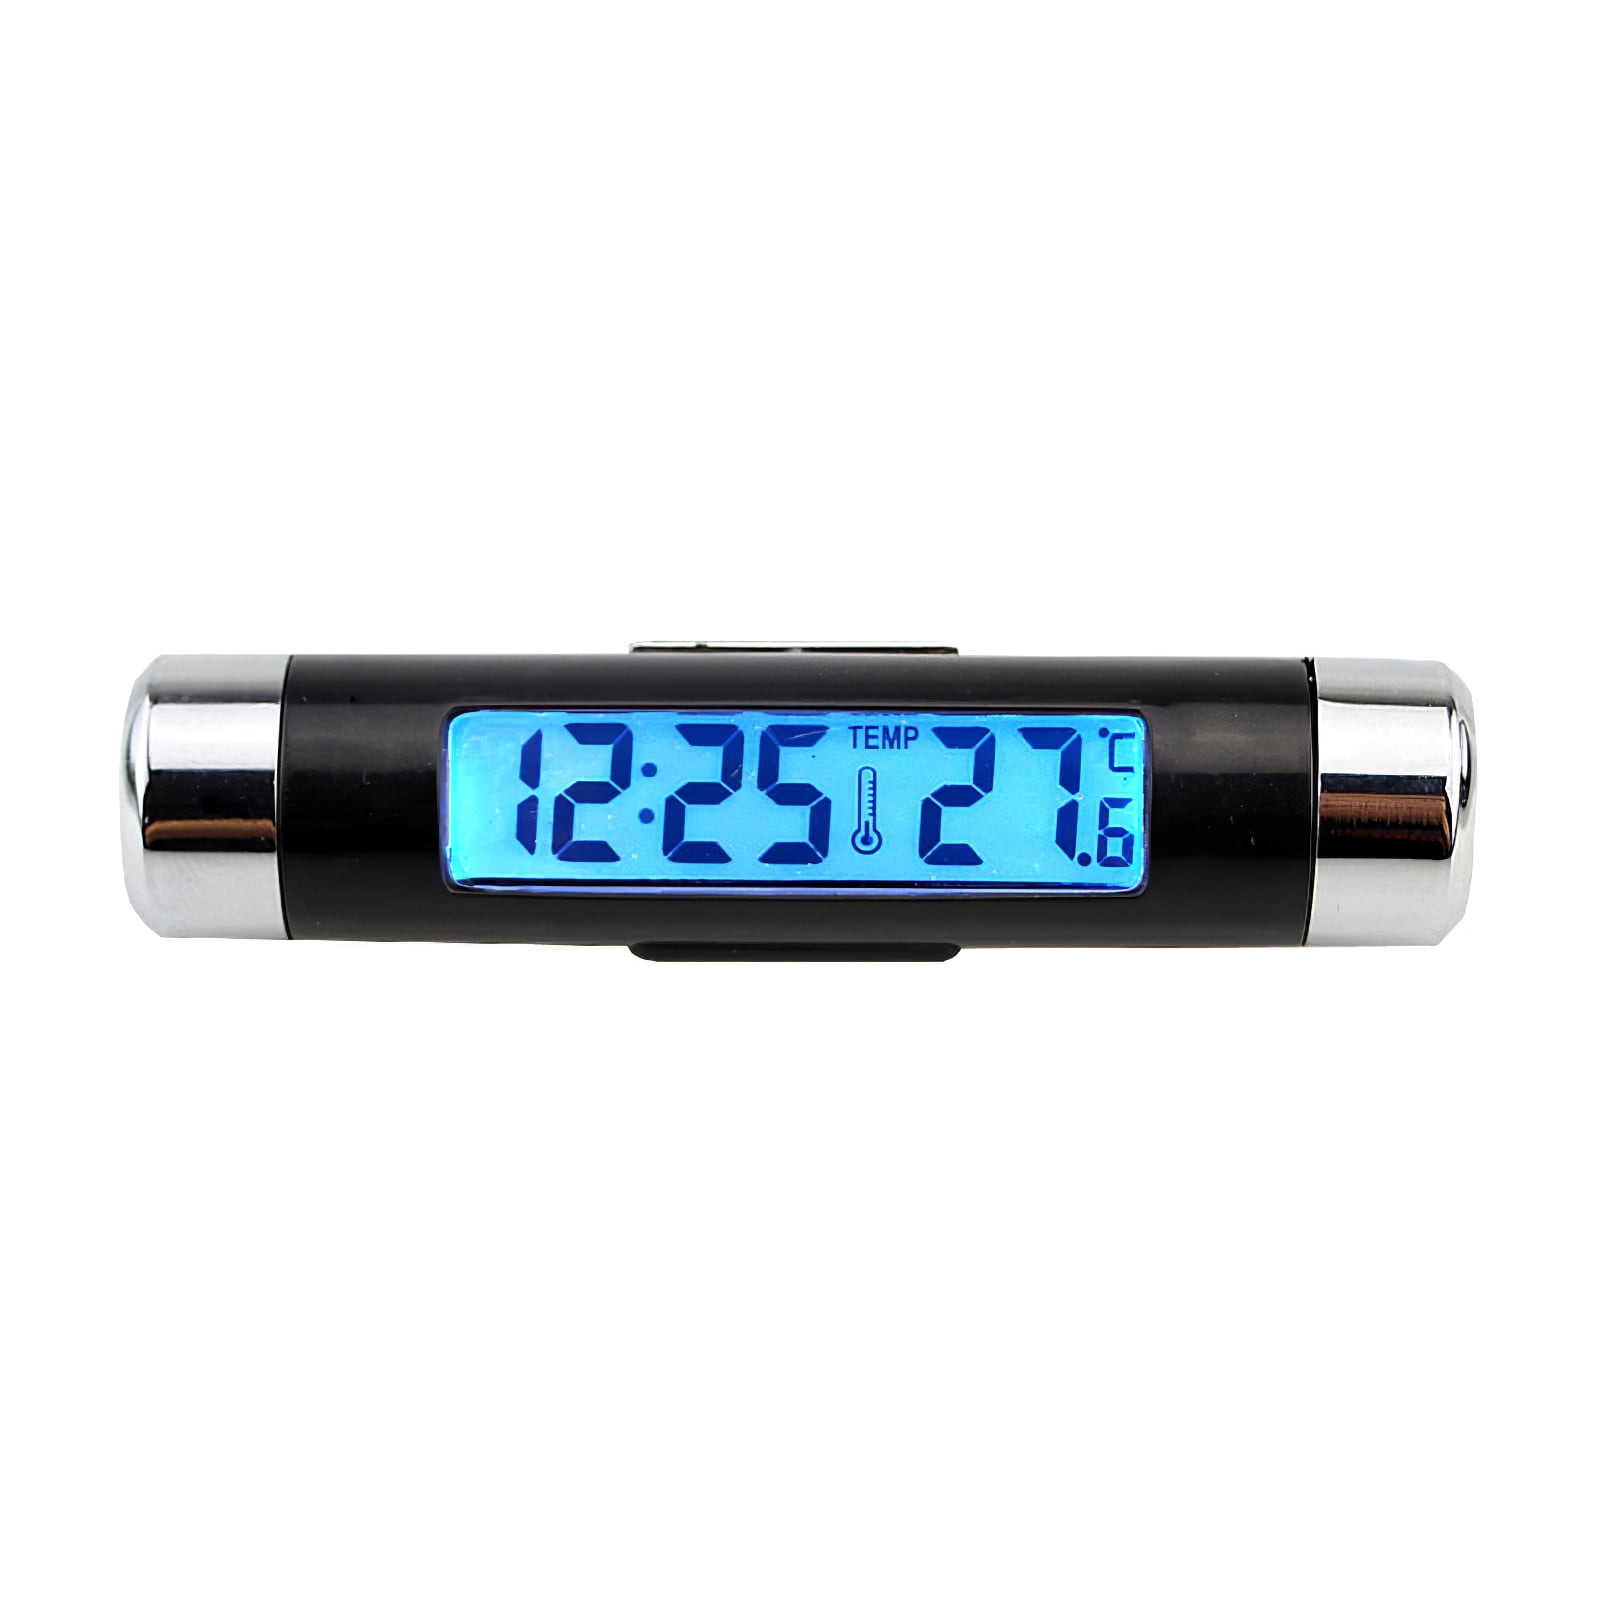 Multi-functional Car Auto Electronic Clock Thermometer LED Backlight Digital Display 2-in-1 Auto Car Electronic Clock